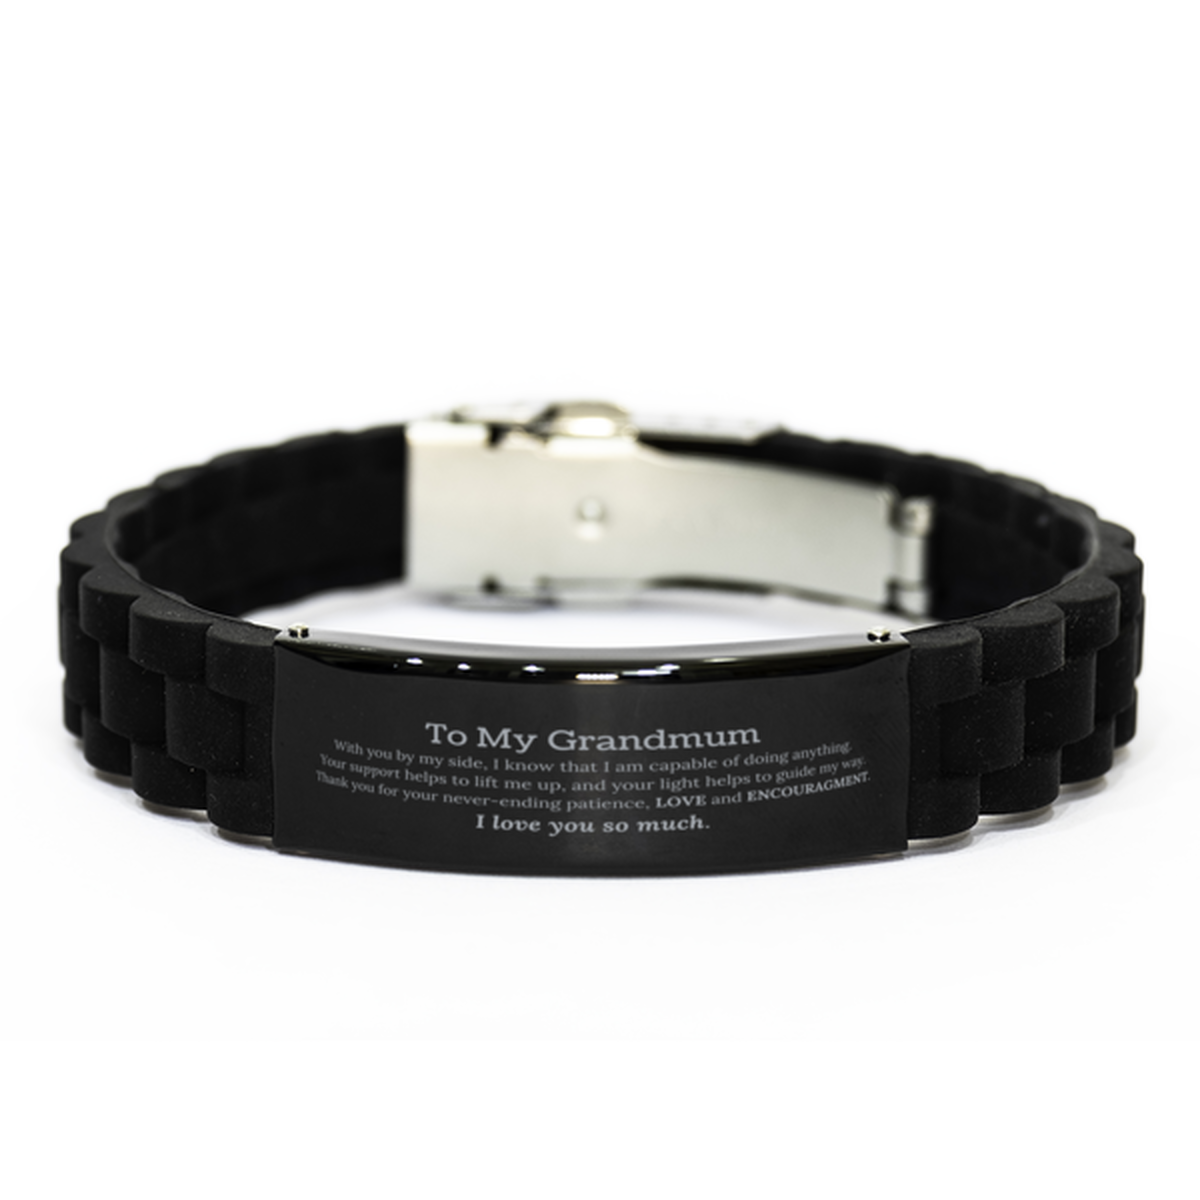 Appreciation Grandmum Black Glidelock Clasp Bracelet Gifts, To My Grandmum Birthday Christmas Wedding Keepsake Gifts for Grandmum With you by my side, I know that I am capable of doing anything. I love you so much